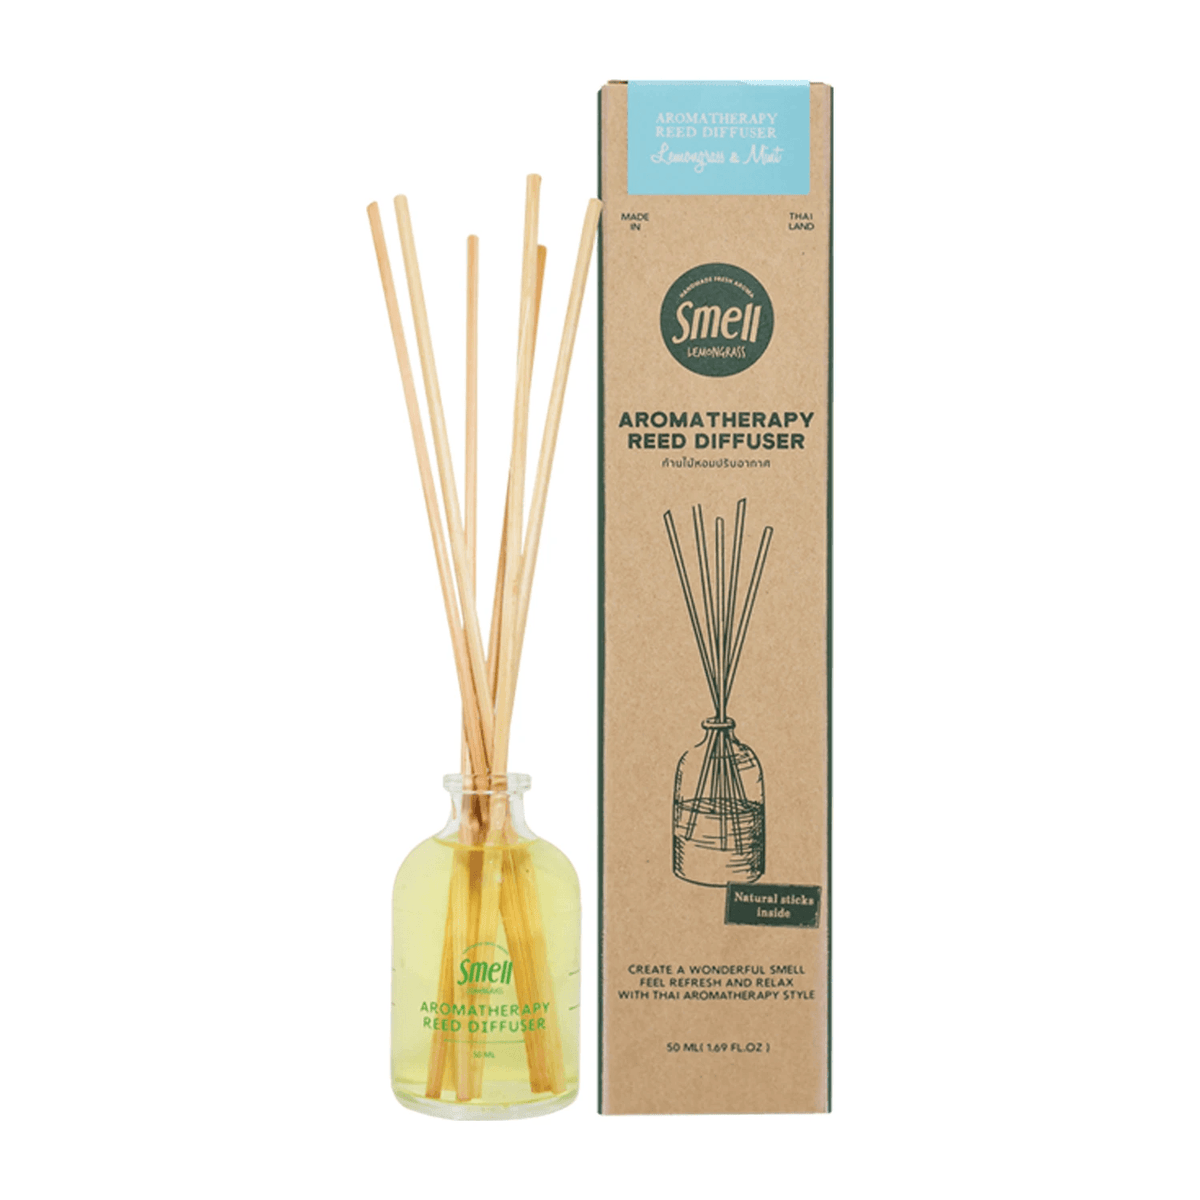 Smell Lemongrass Handmade Aromatherapy Calm & Relax Mosquito Repellent Reed Diffuser (Lemongrass & Mint) 50ml - CC Outlet HK